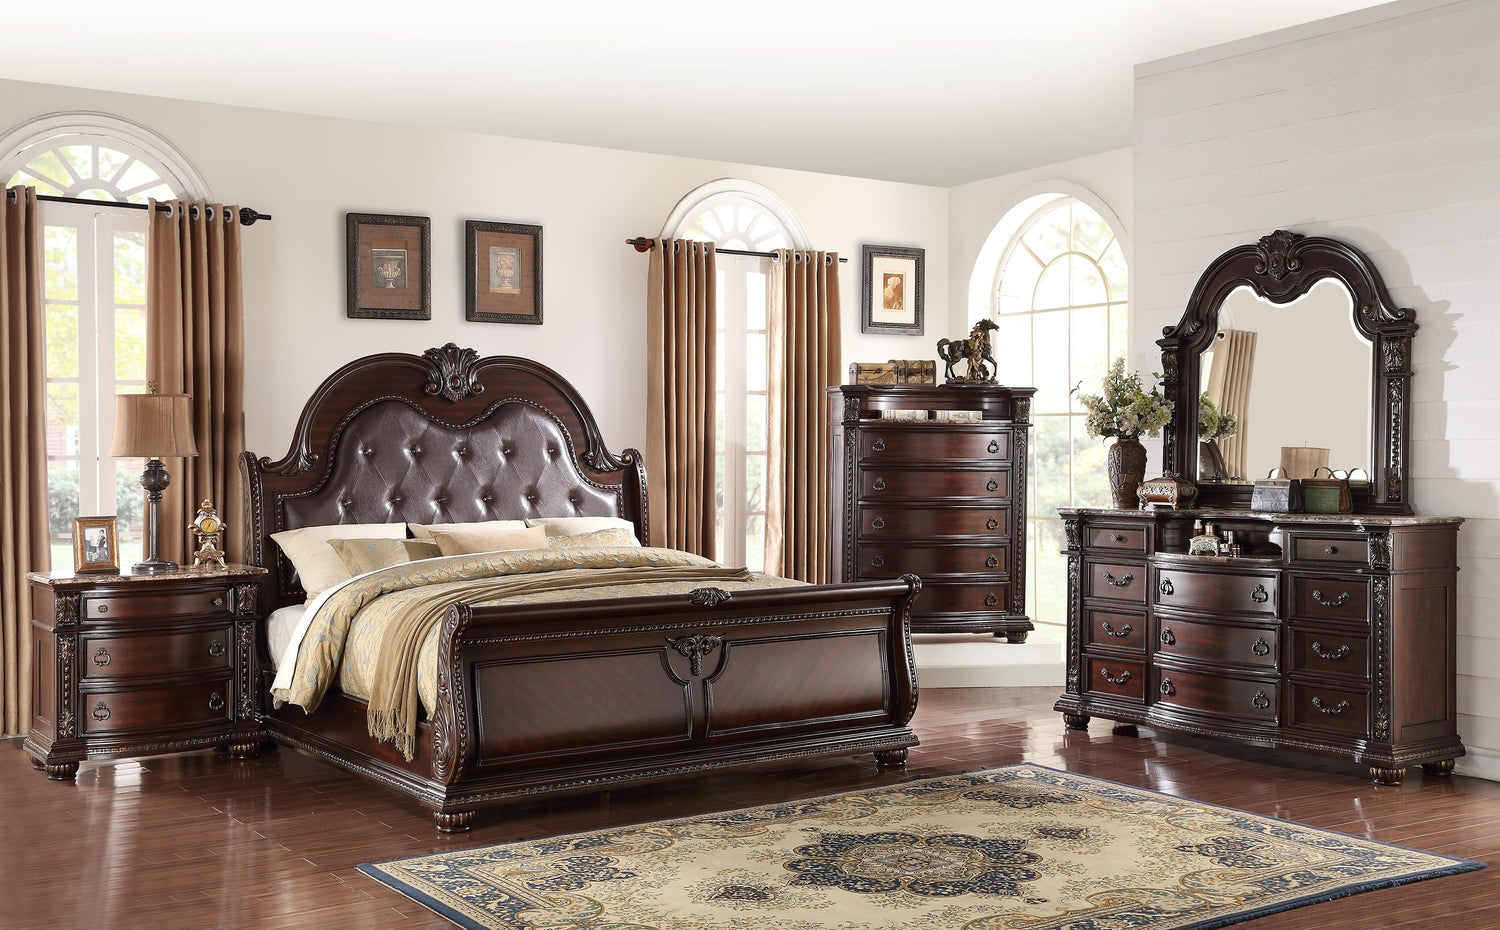 Stanley Cherry Brown Upholstered Sleigh Bedroom Set - SET | B1600-Q-HB | B1600-Q-FB | B1600-KQ-HBLEG | B1600-KQ-RAIL | B1600-1 | B1600-2 - Bien Home Furniture &amp; Electronics